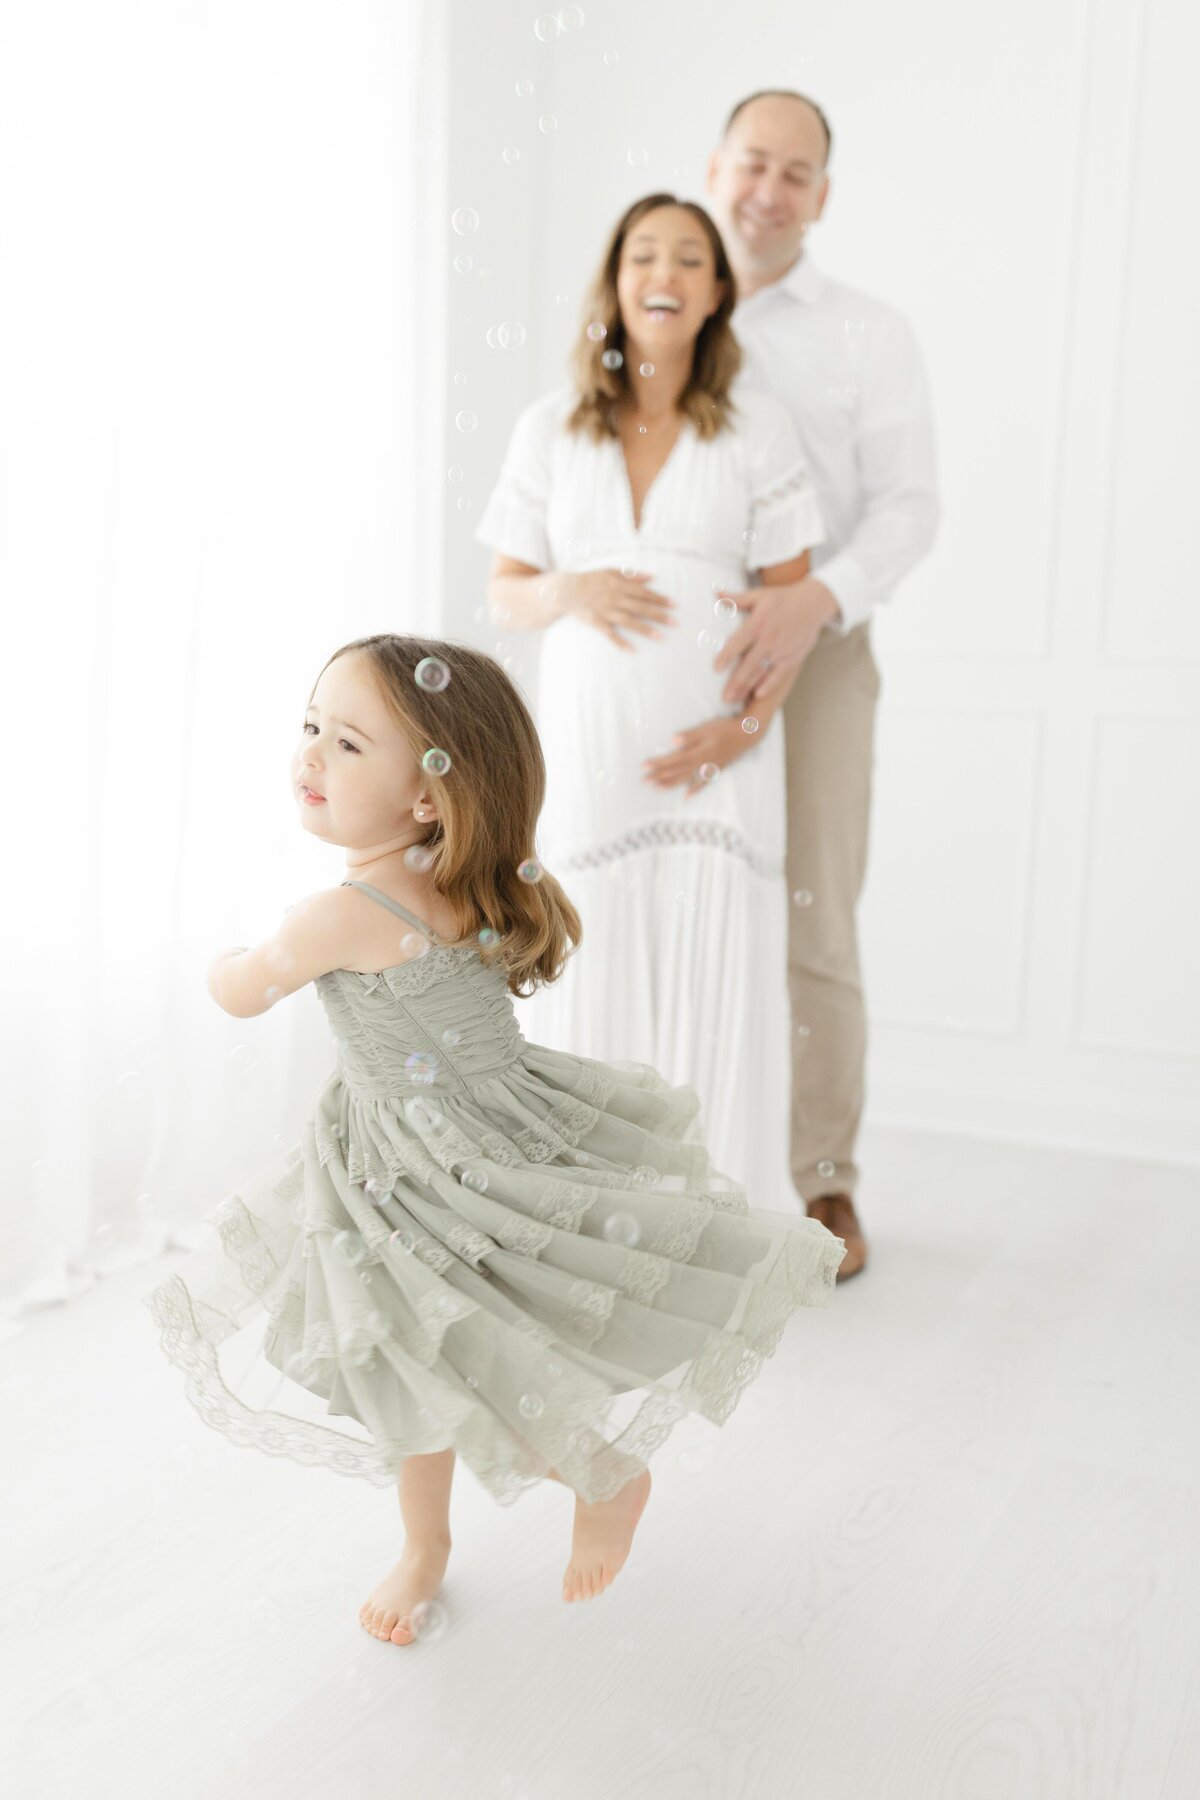 DC-maternity-photography-stephanie-honikel-photography020 (1 of 1)